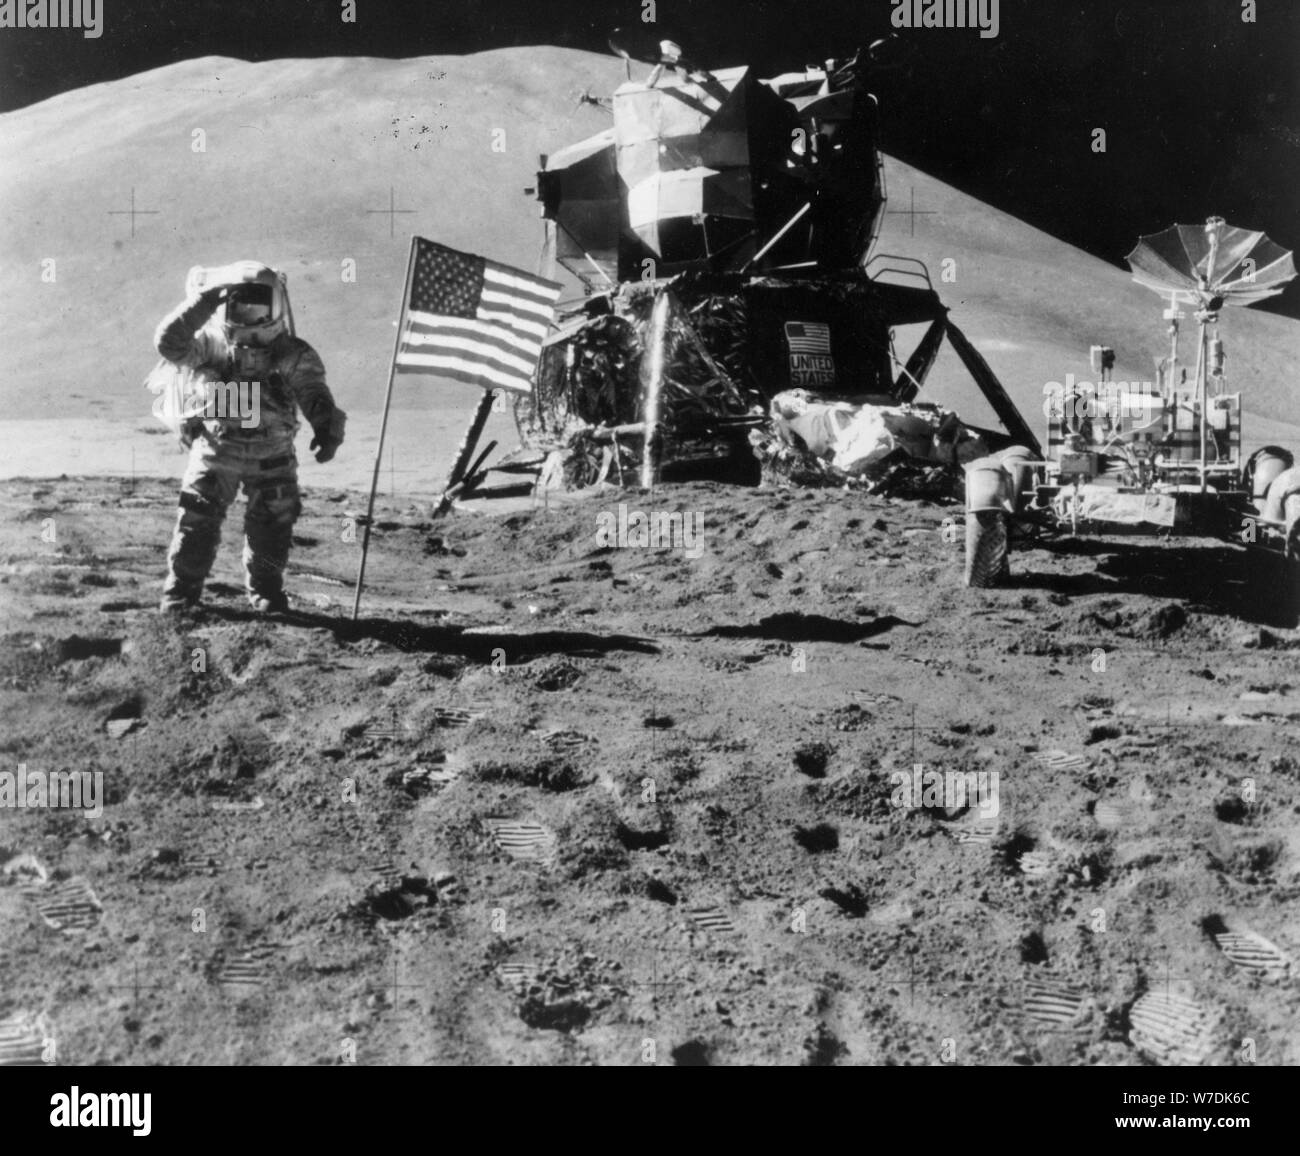 James Irwin (1930-1991) salutes the American flag during the Apollo 15 mission, 1971. Artist: Unknown Stock Photo